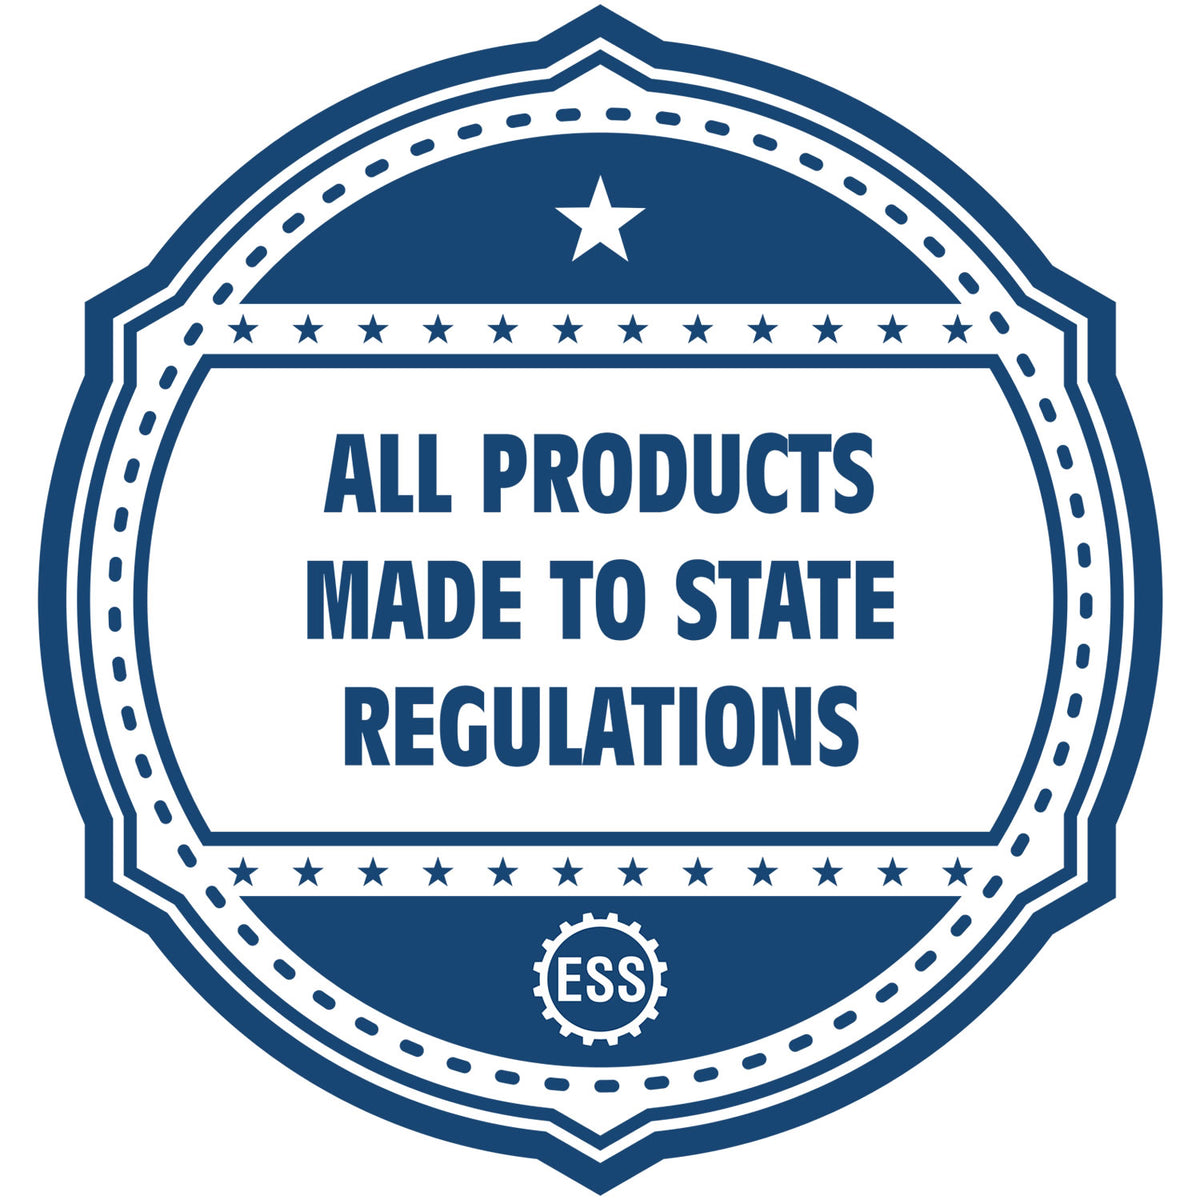 An icon or badge element for the State of South Carolina Extended Long Reach Engineer Seal showing that this product is made in compliance with state regulations.